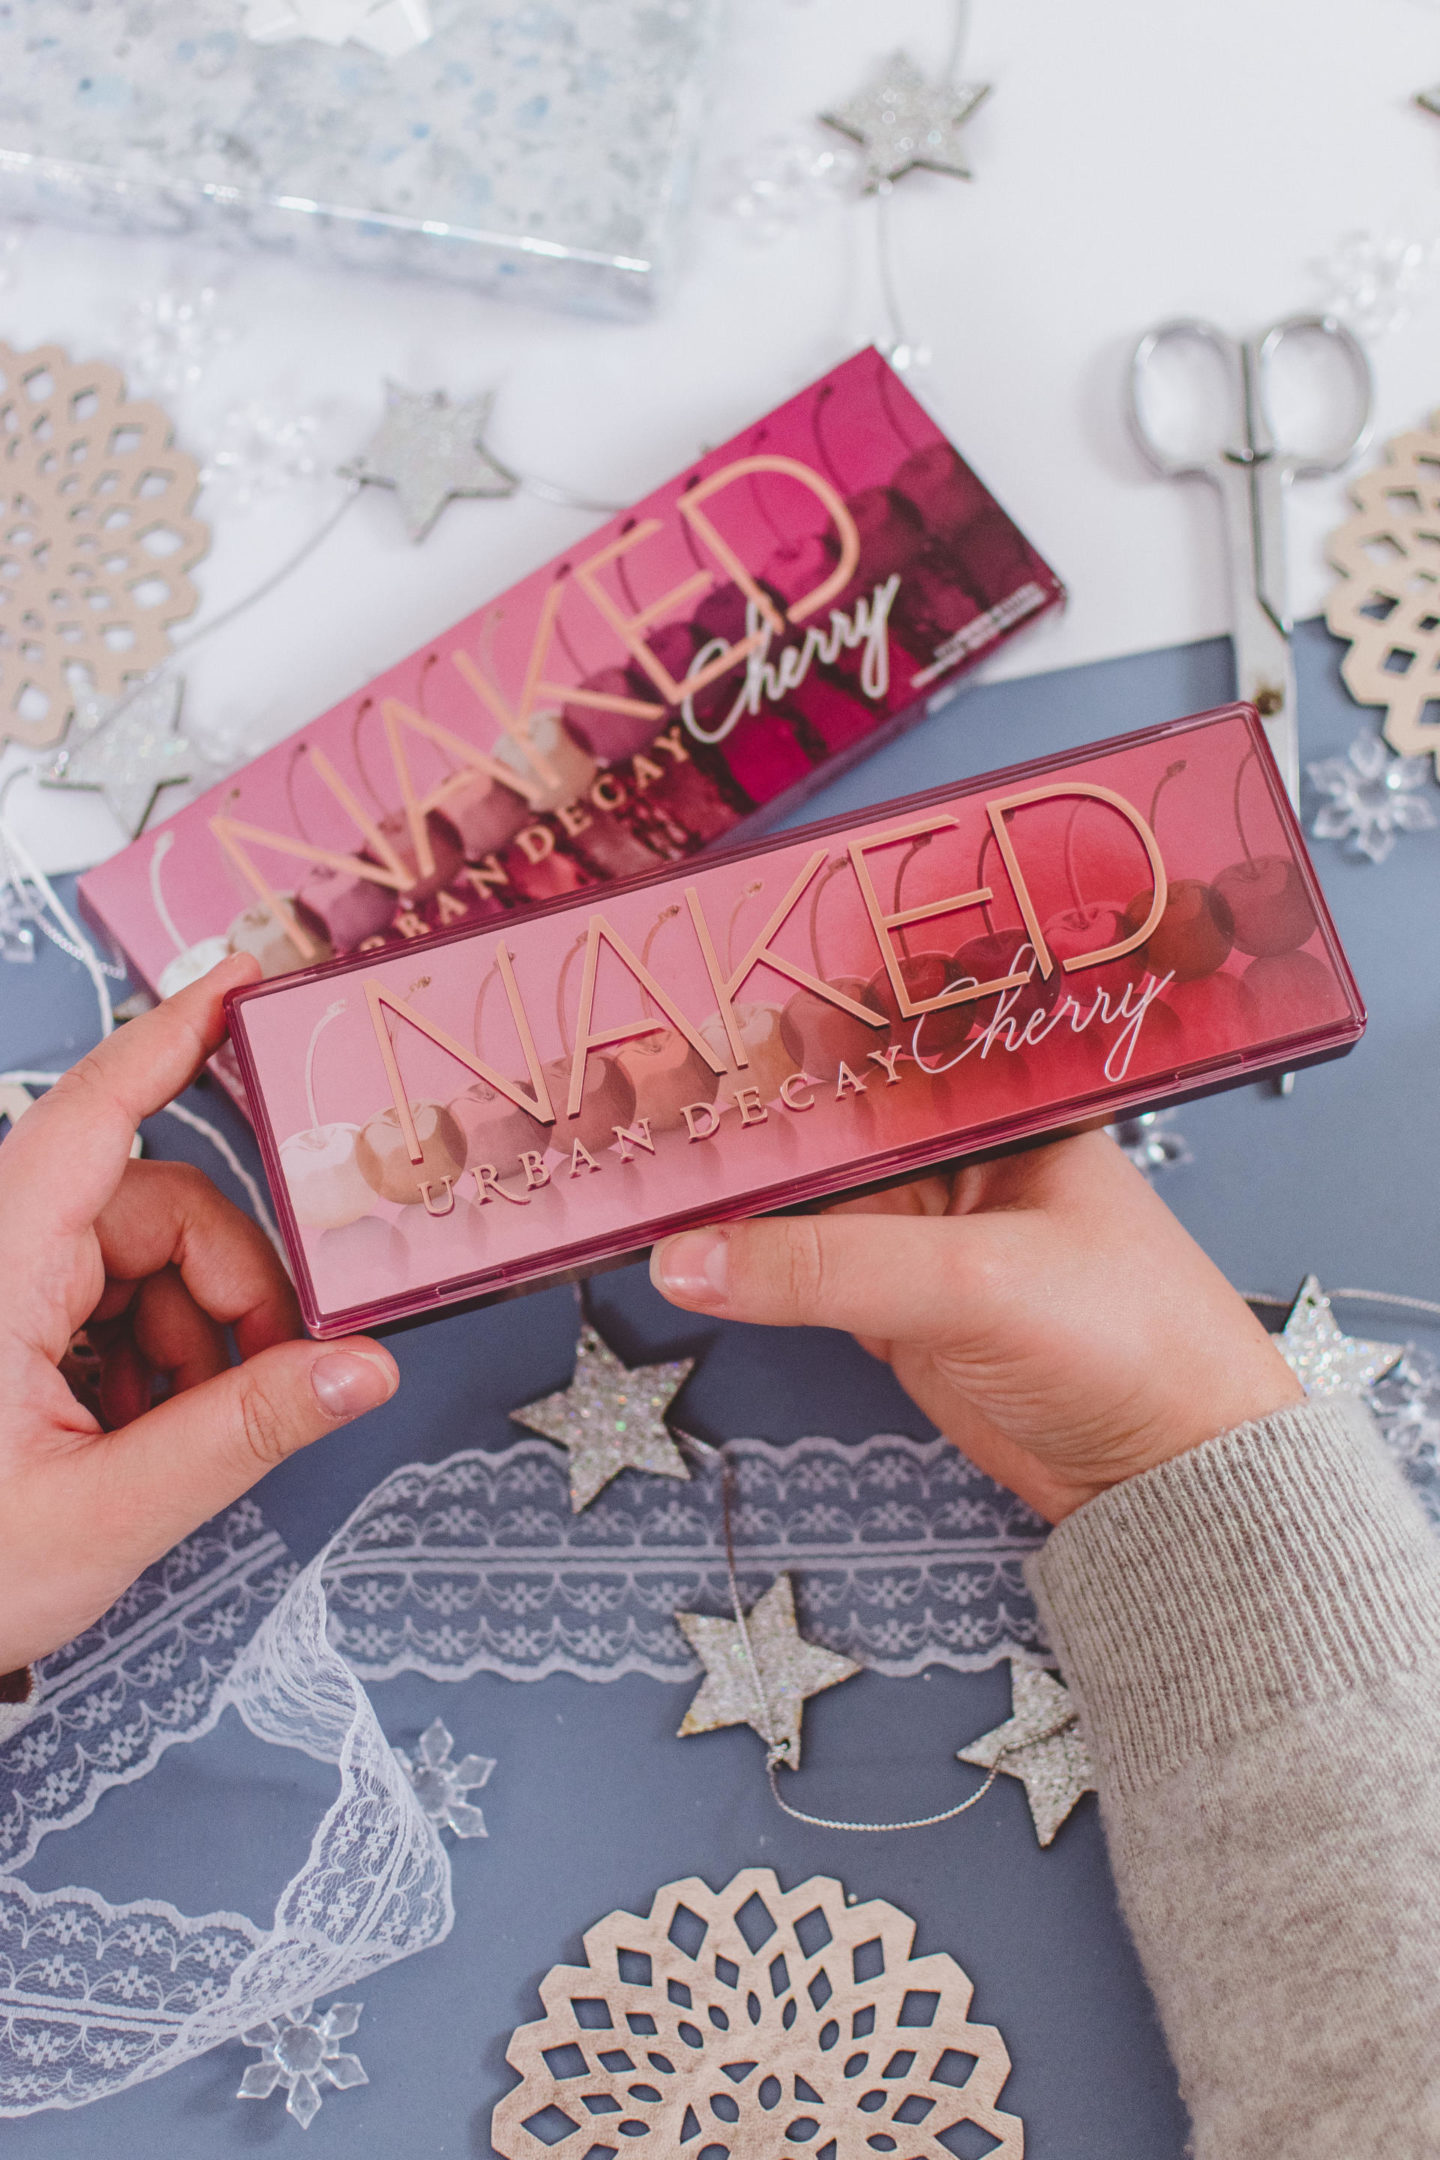 Urban Decay Naked Cherry Palette Review